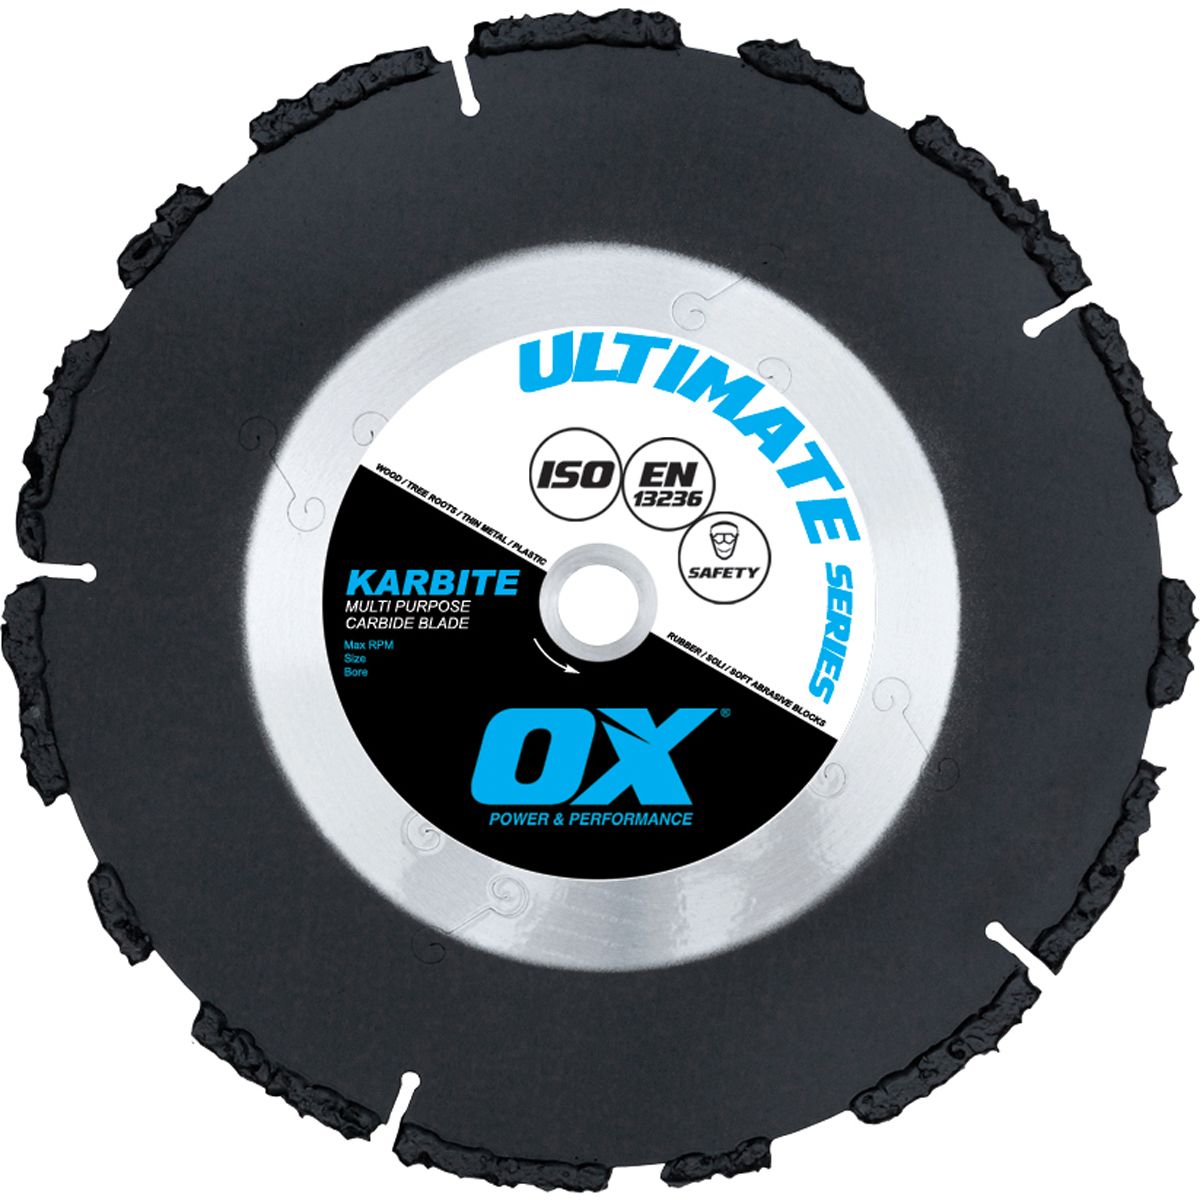 14 in. Carbide Saw Blade Cuts All Materials UKB Karbite Carbour Tools